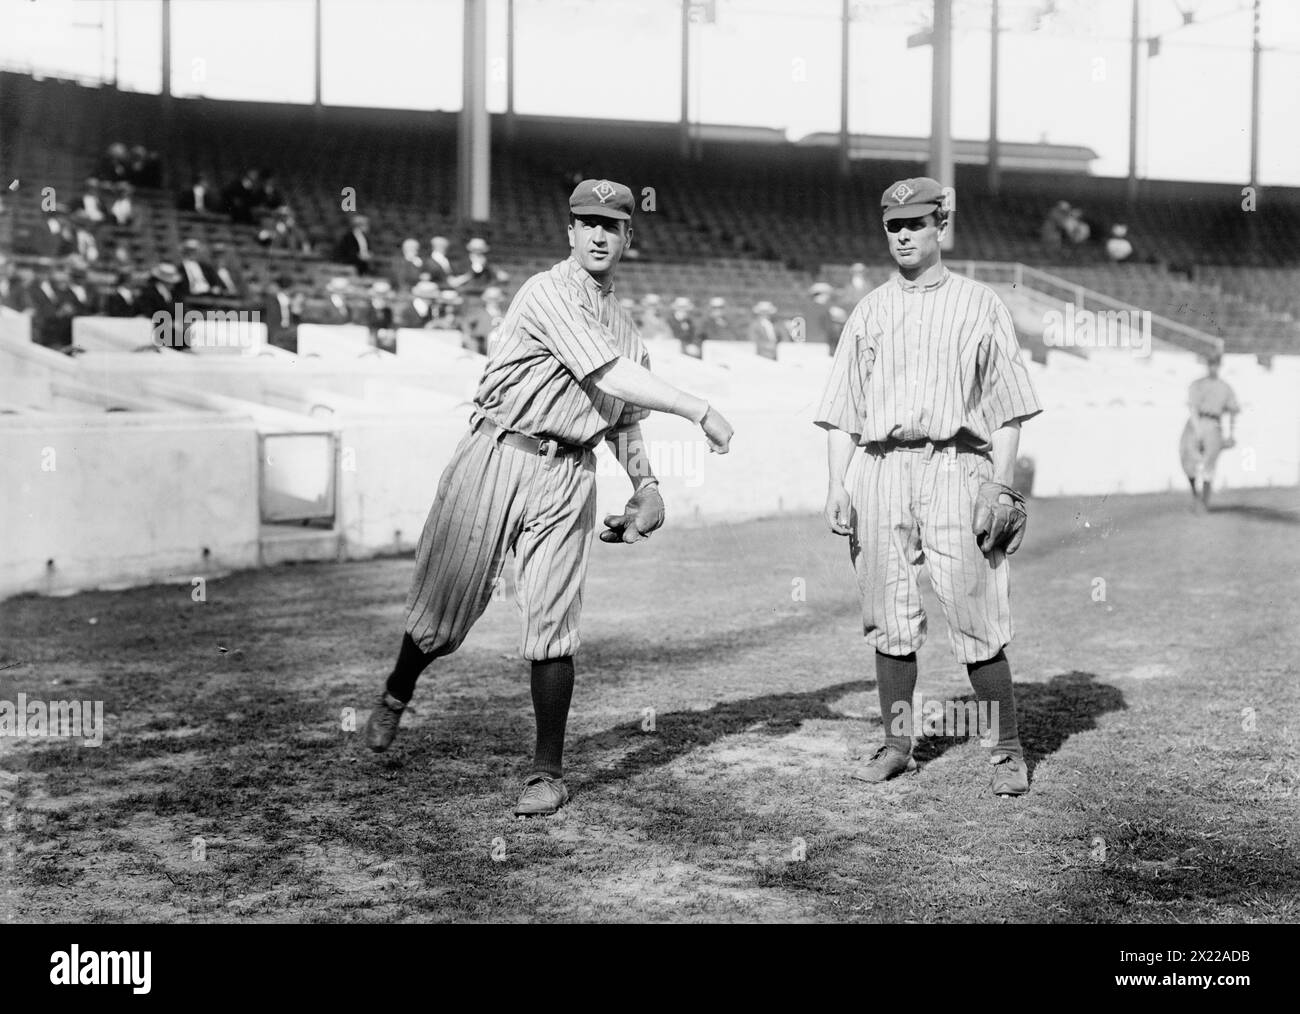 Bob Fisher &amp; George Cutshaw, Brooklyn NL, at the Polo Grounds, NY (baseball), 1912. Foto Stock